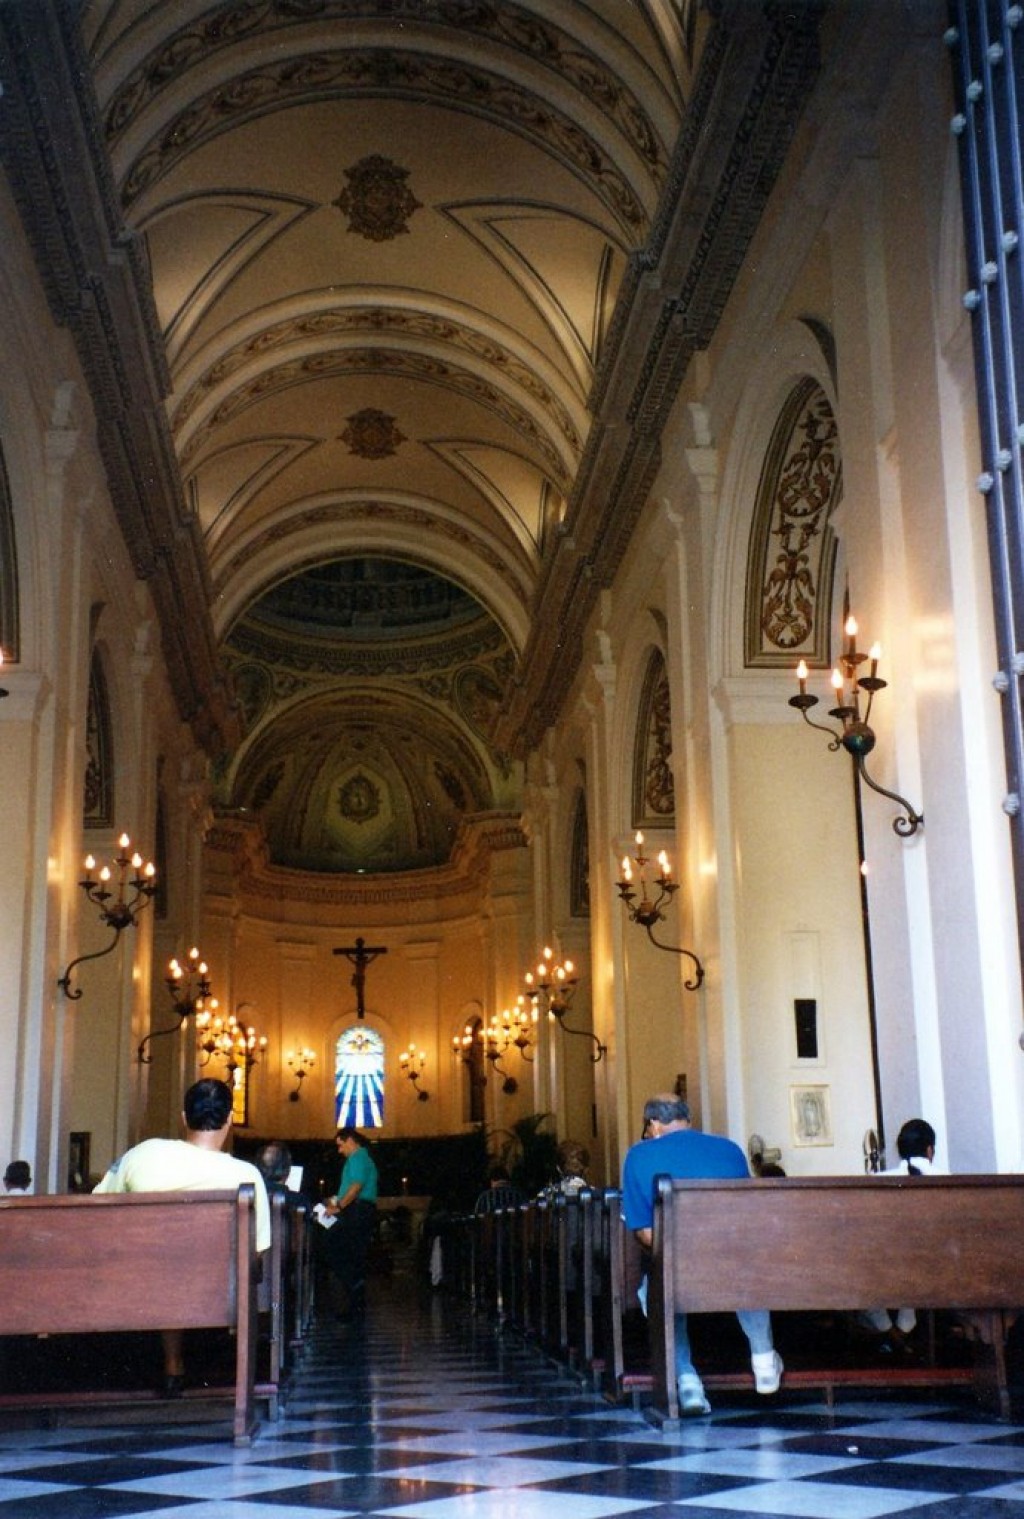 Inside the cathedral in San Juan